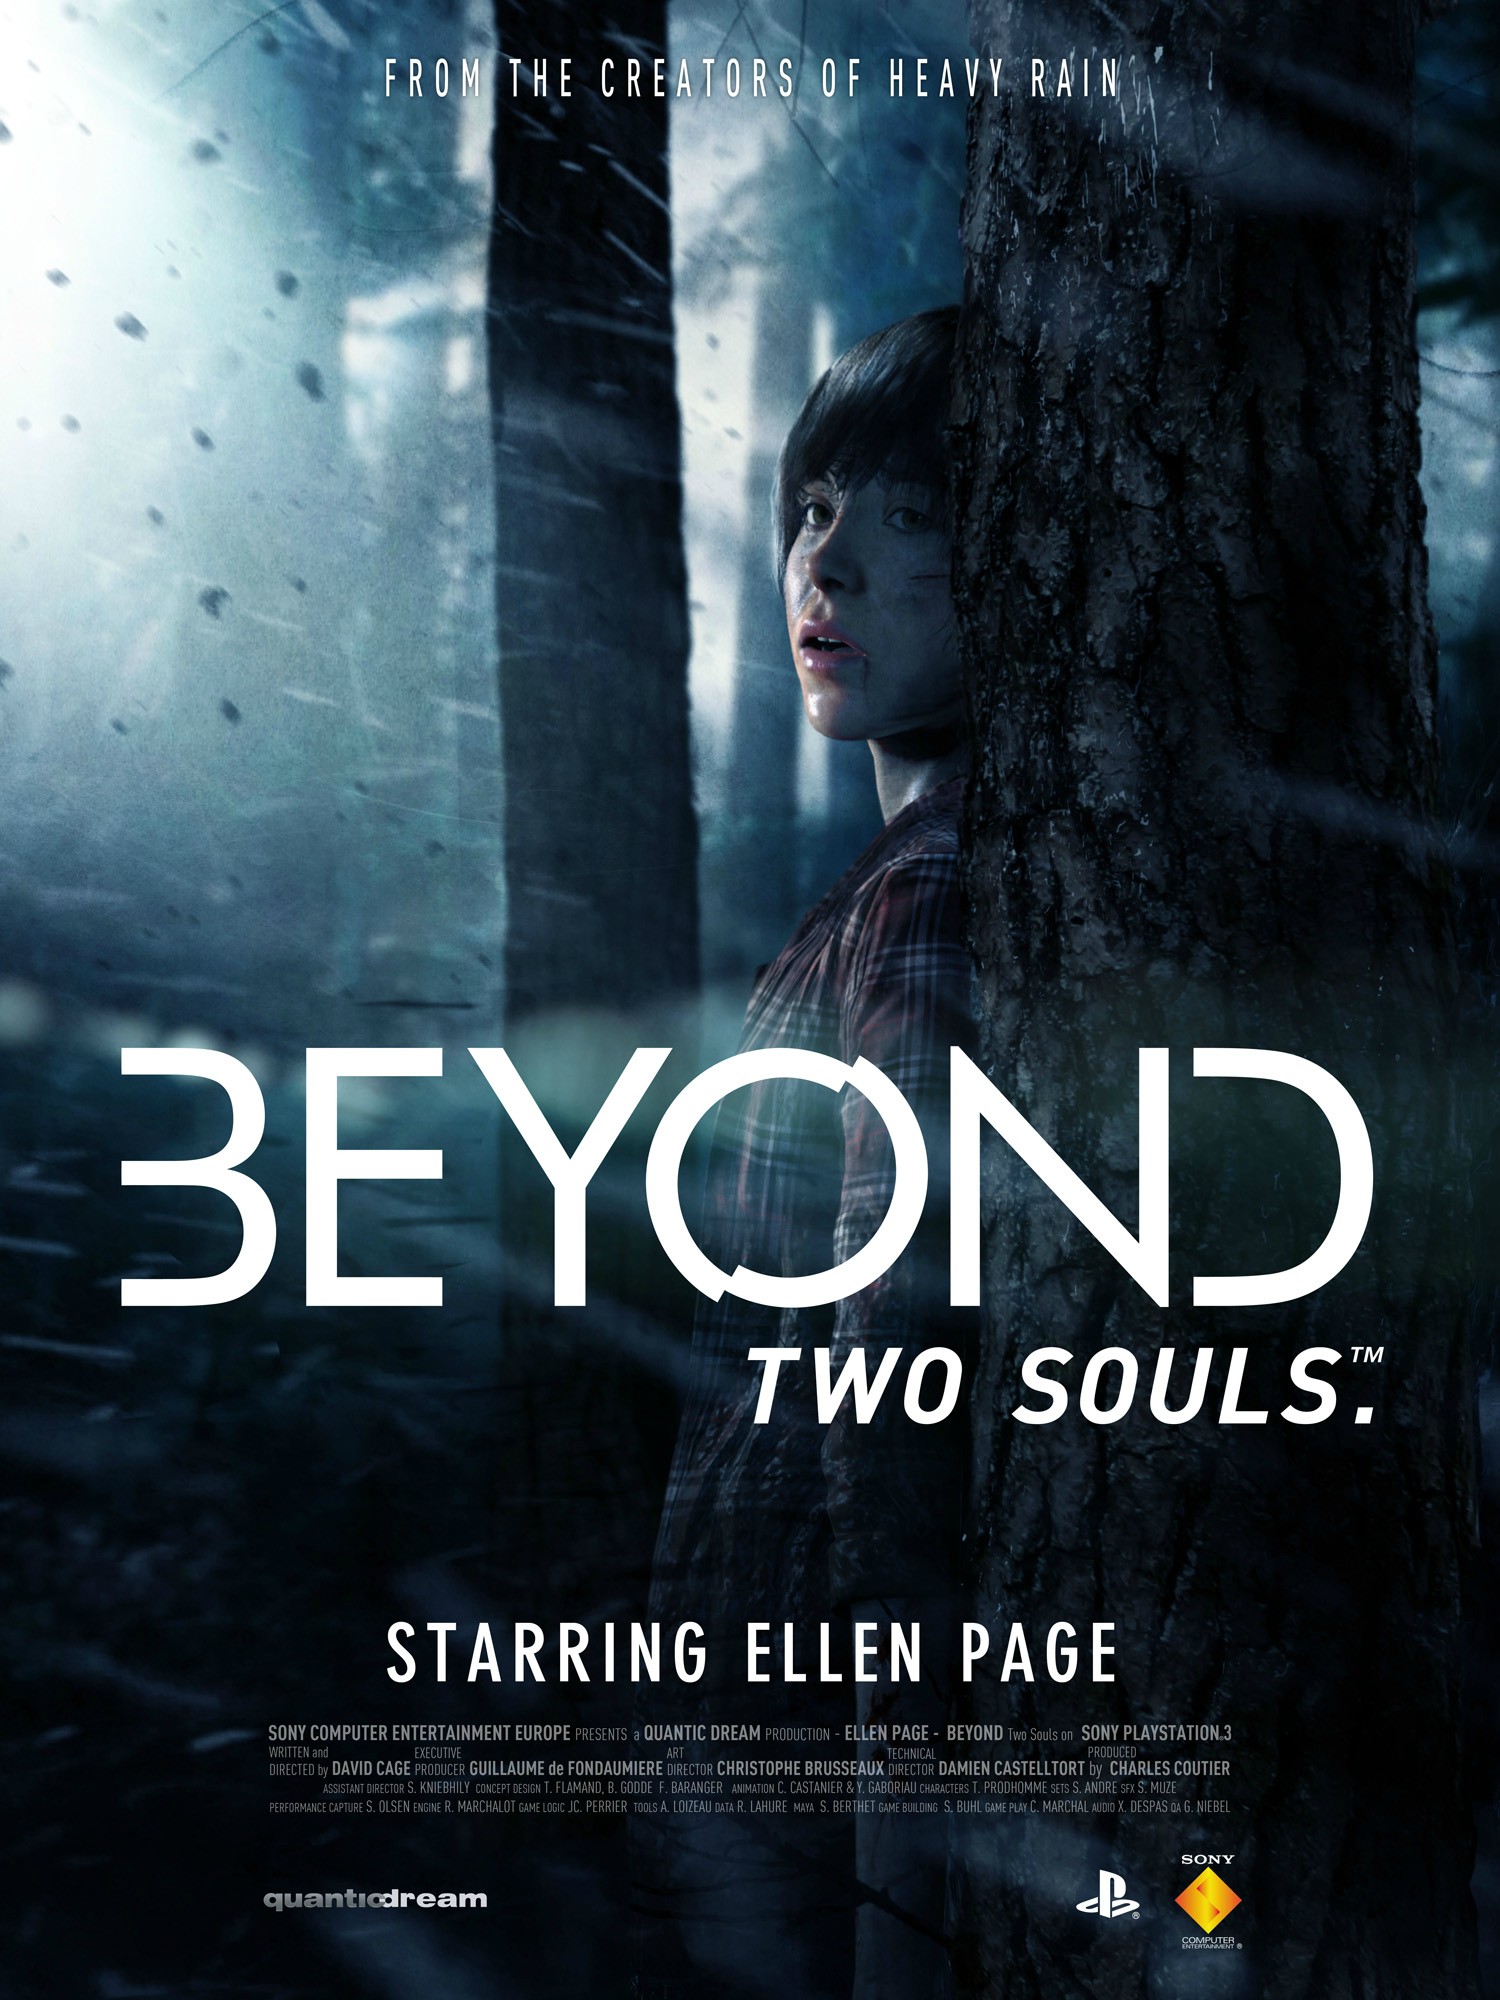 Beyond two souls pc game torrent free